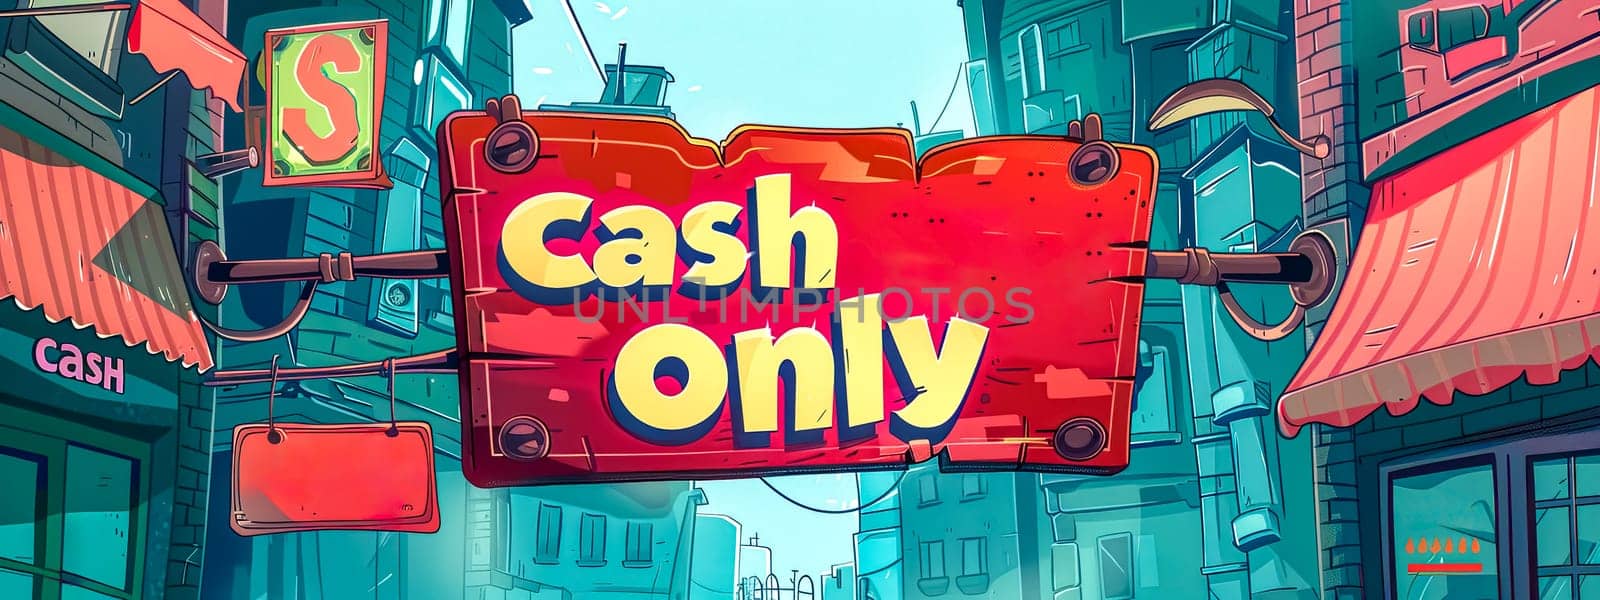 Brightly illustrated sign with 'cash only' text in a vibrant comic-style urban setting